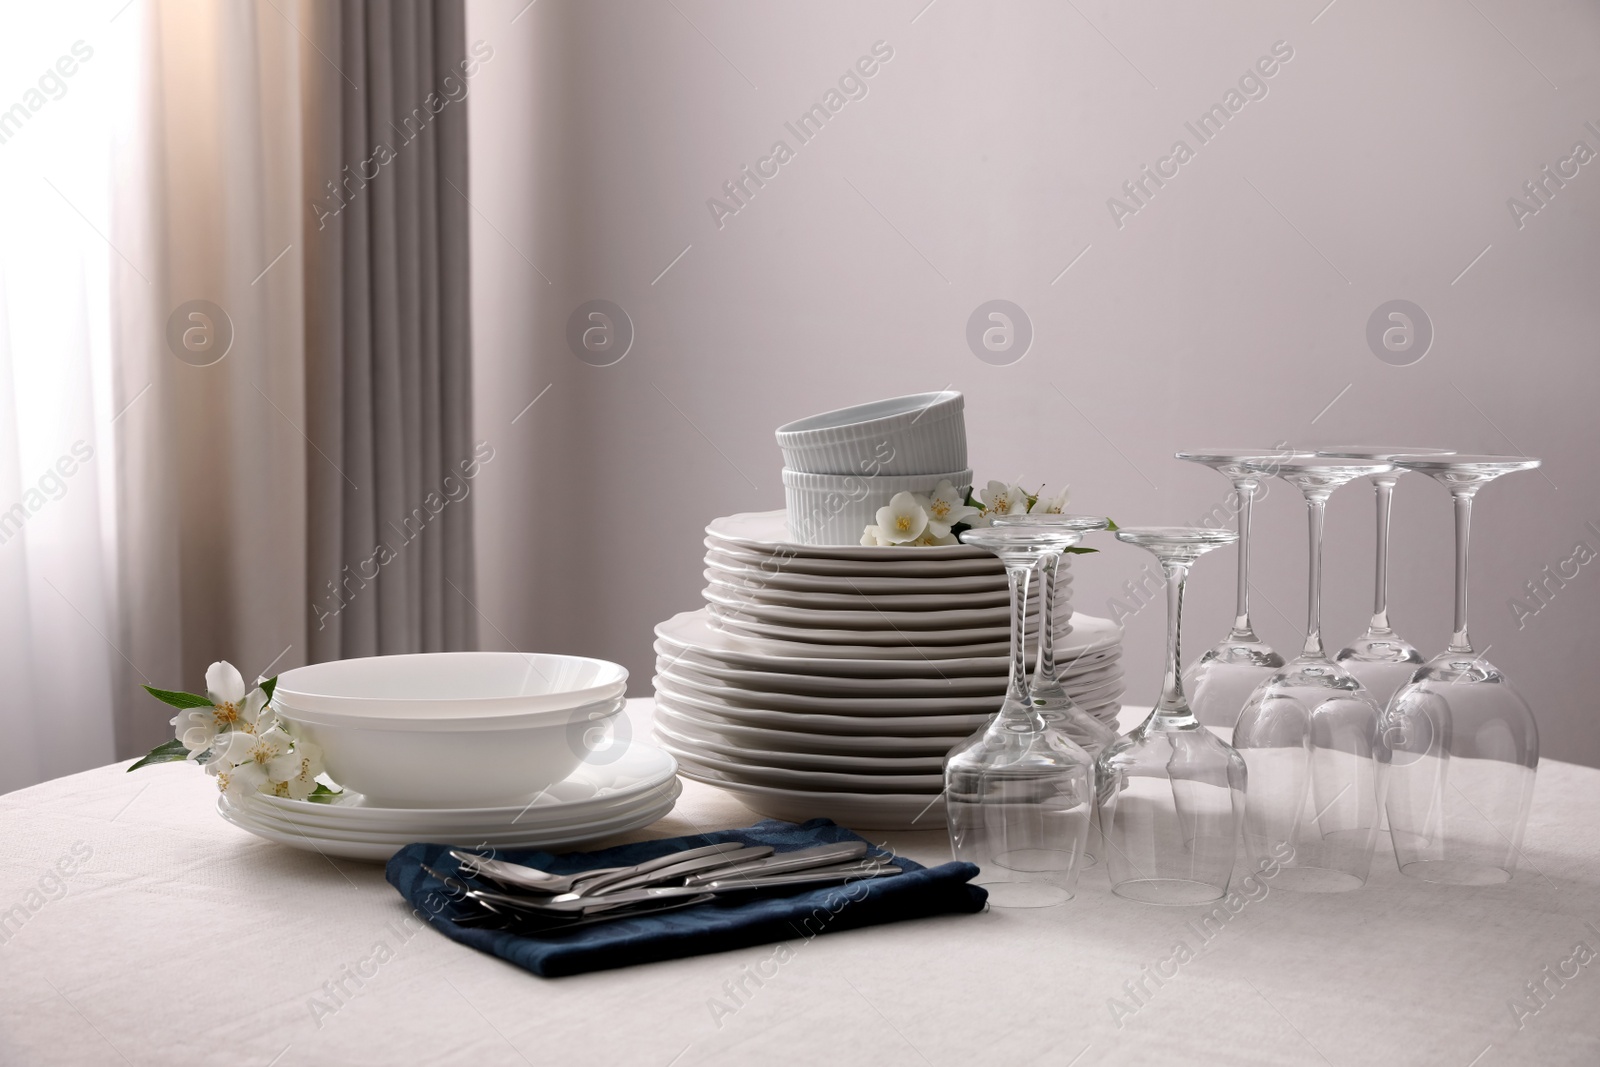 Photo of Set of clean dishware, cutlery and wine glasses on table indoors